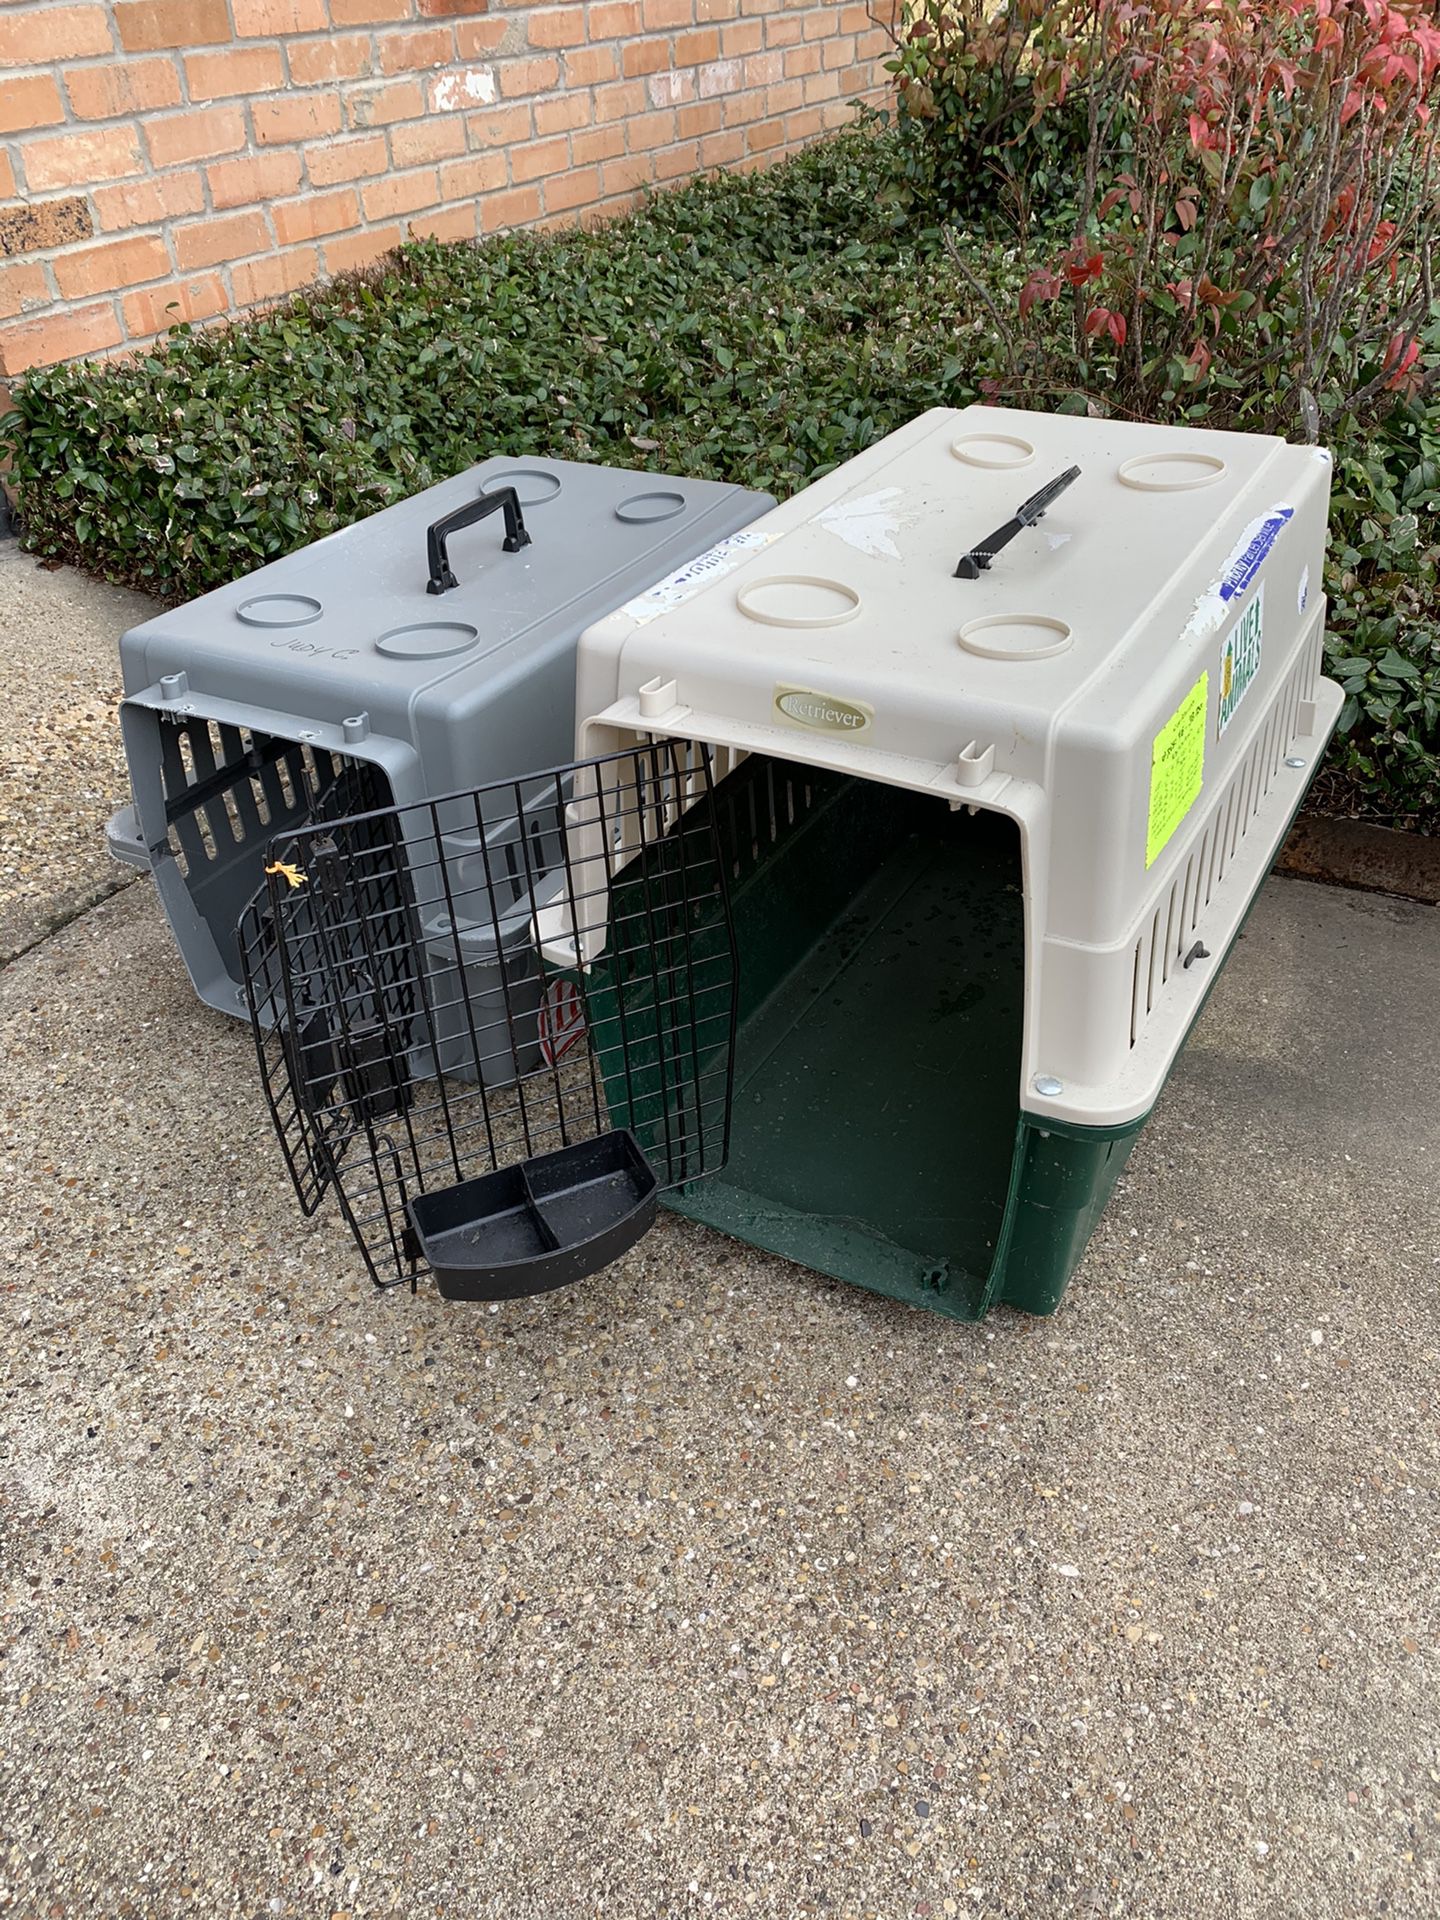 Collapsible Pet Crates $ 25 and $35